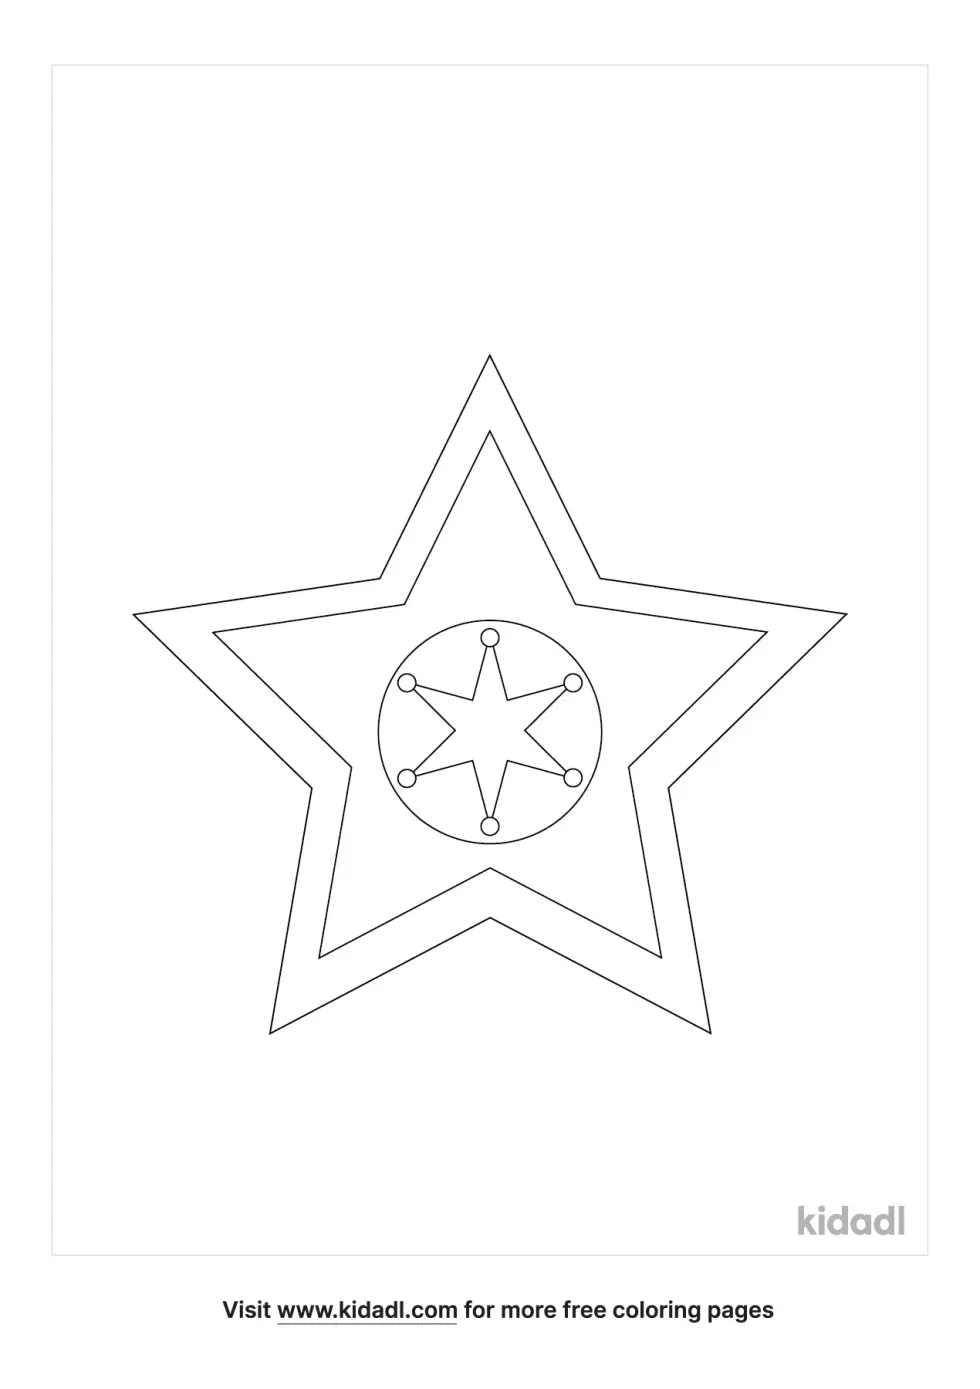 5-Point Star Coloring Page